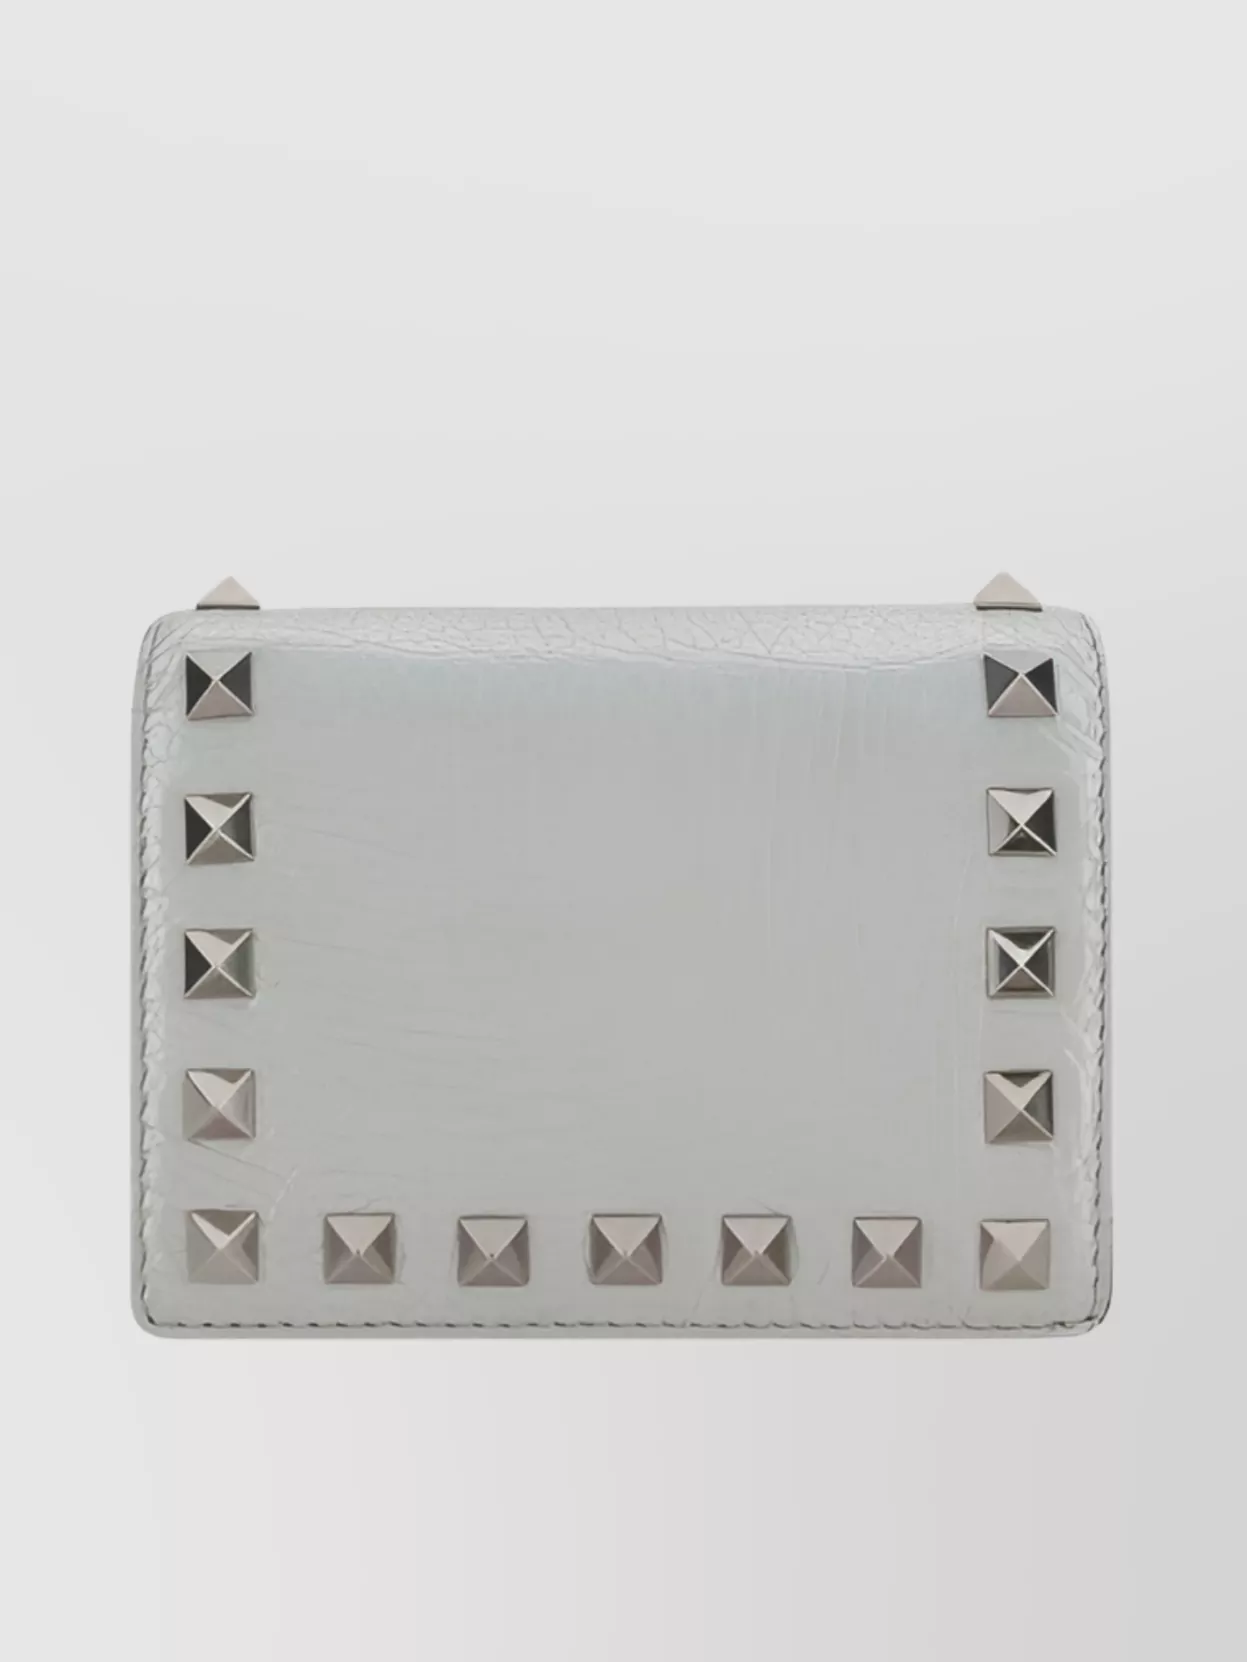 Valentino Garavani Rockstud Wallet With Beading And Grained Leather In Gray